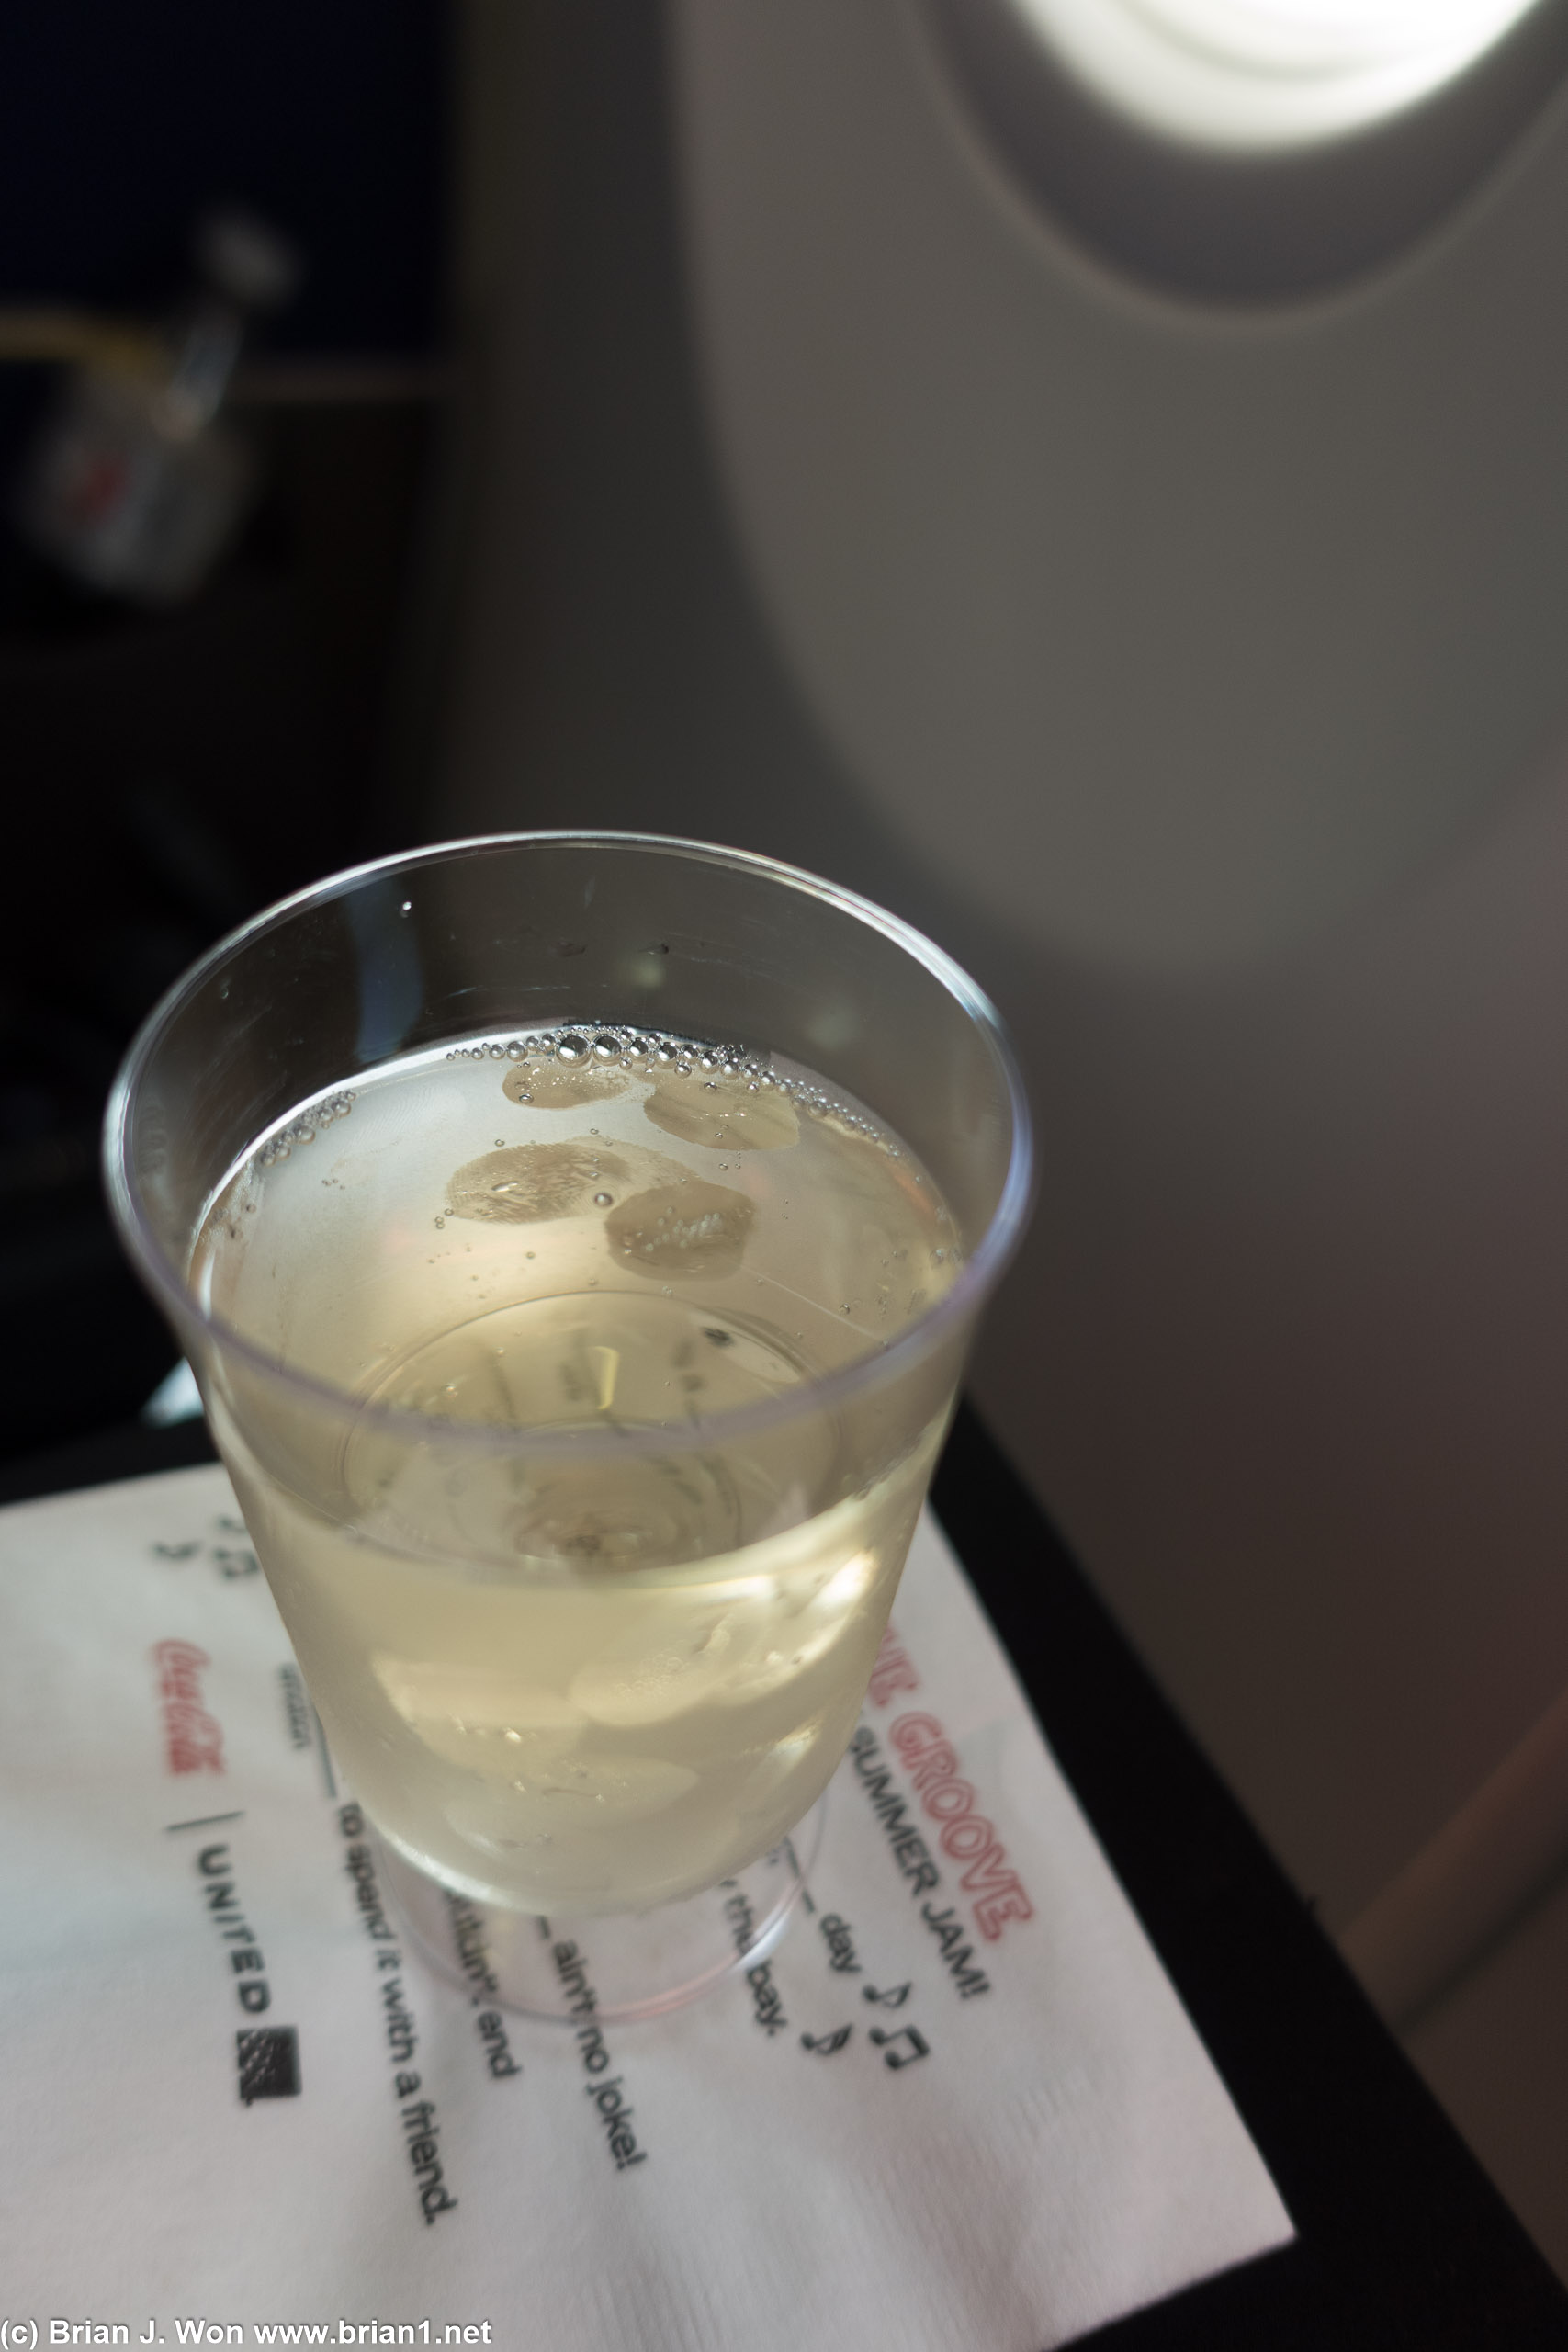 Flight crew hooked me up with a glass of sparkling wine from the first class cabin.